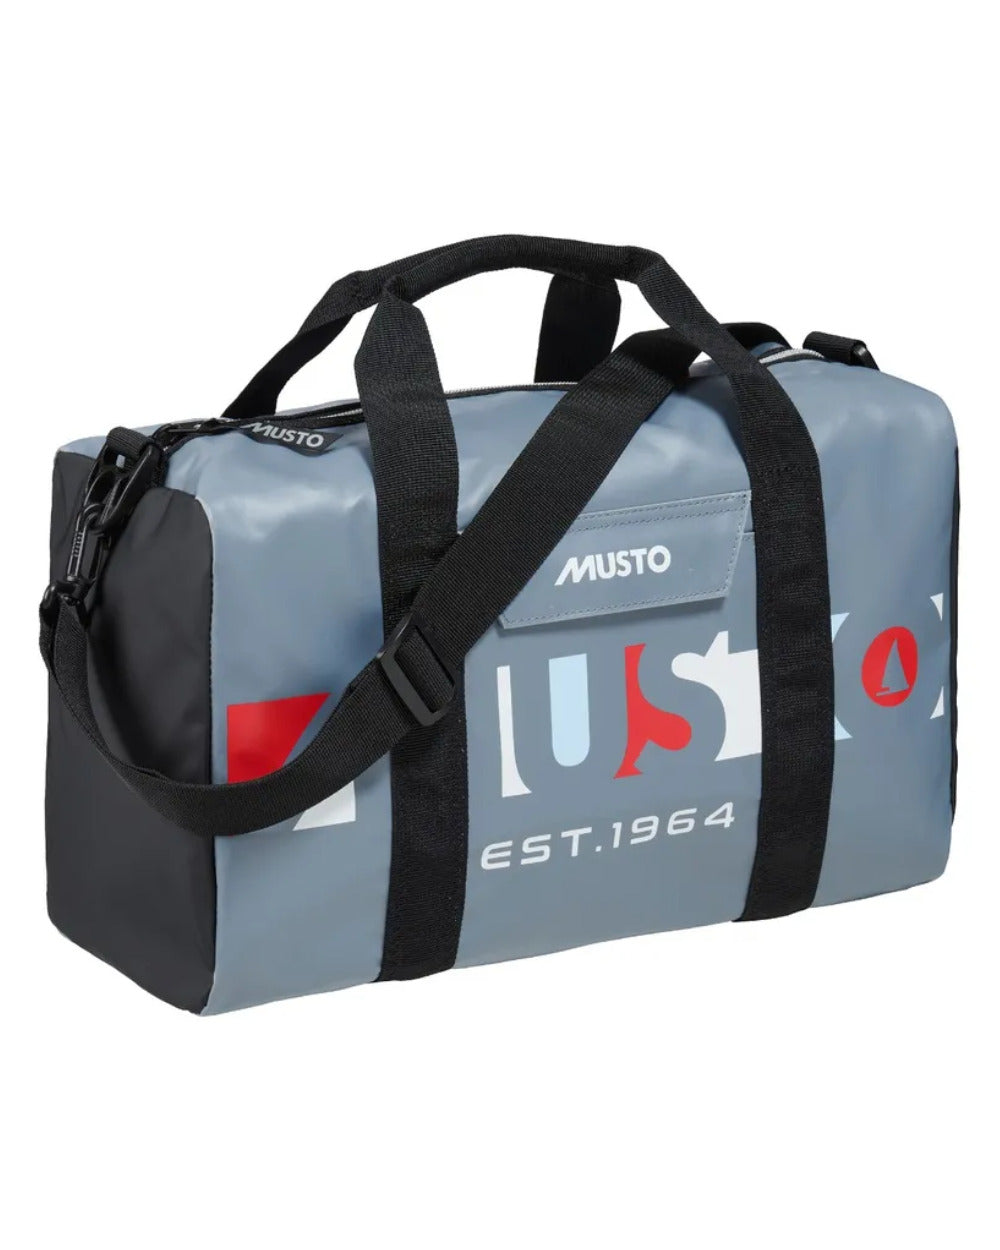 Stormy Weat Coloured Musto Genoa Small Carryall On A White Background 